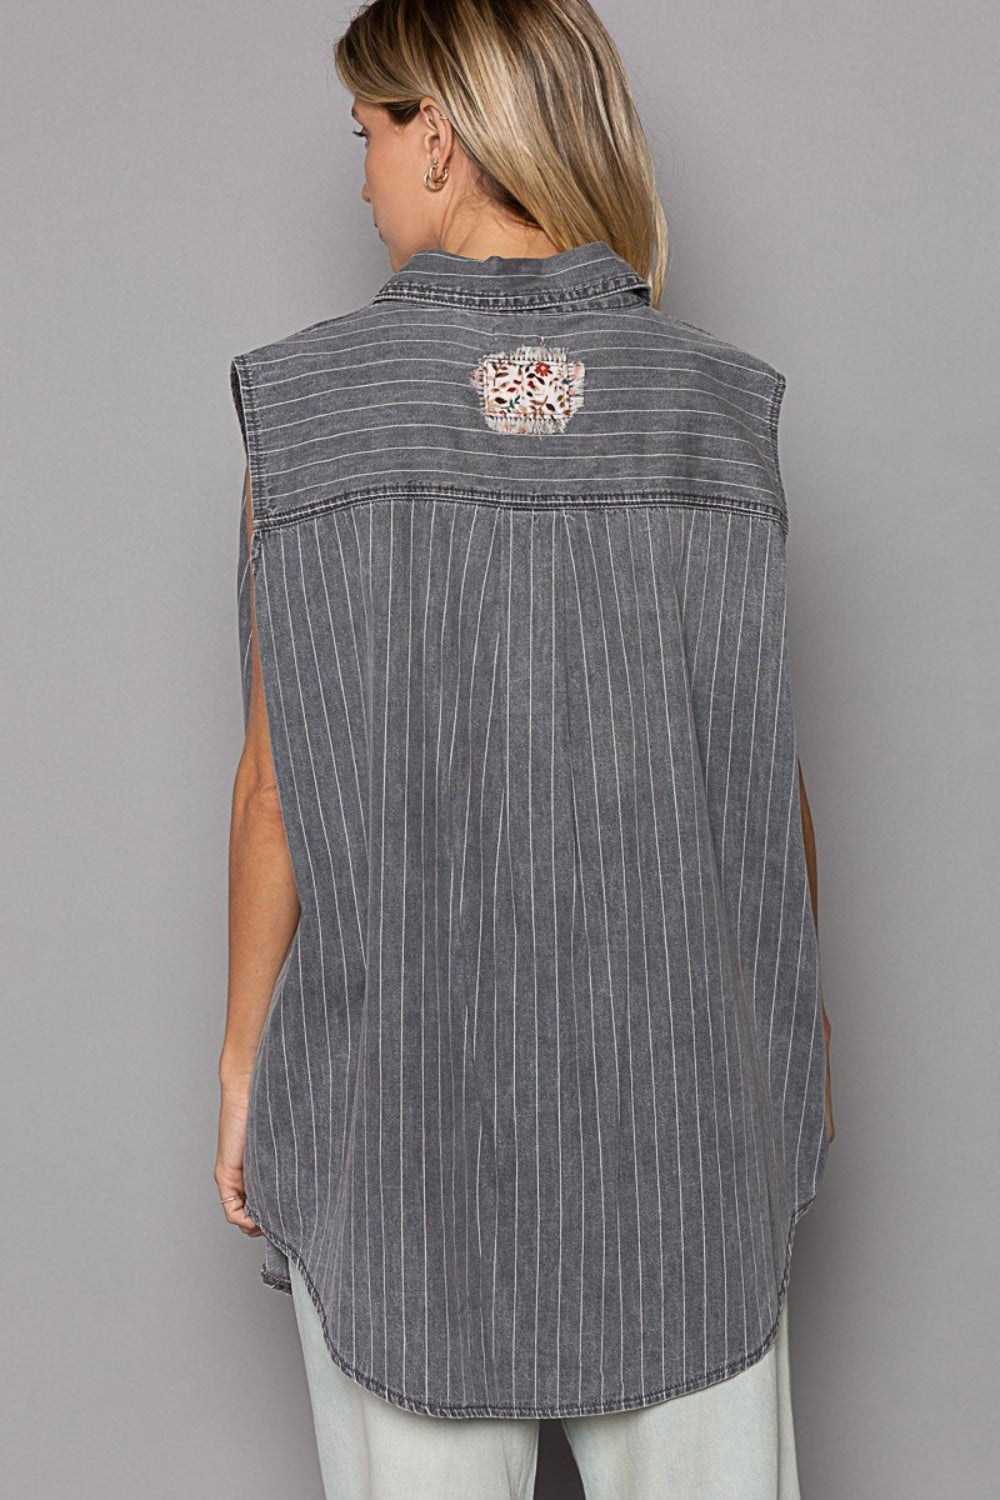 POL Button Down Sleeveless Striped Denim Shirt - Happily Ever Atchison Shop Co.